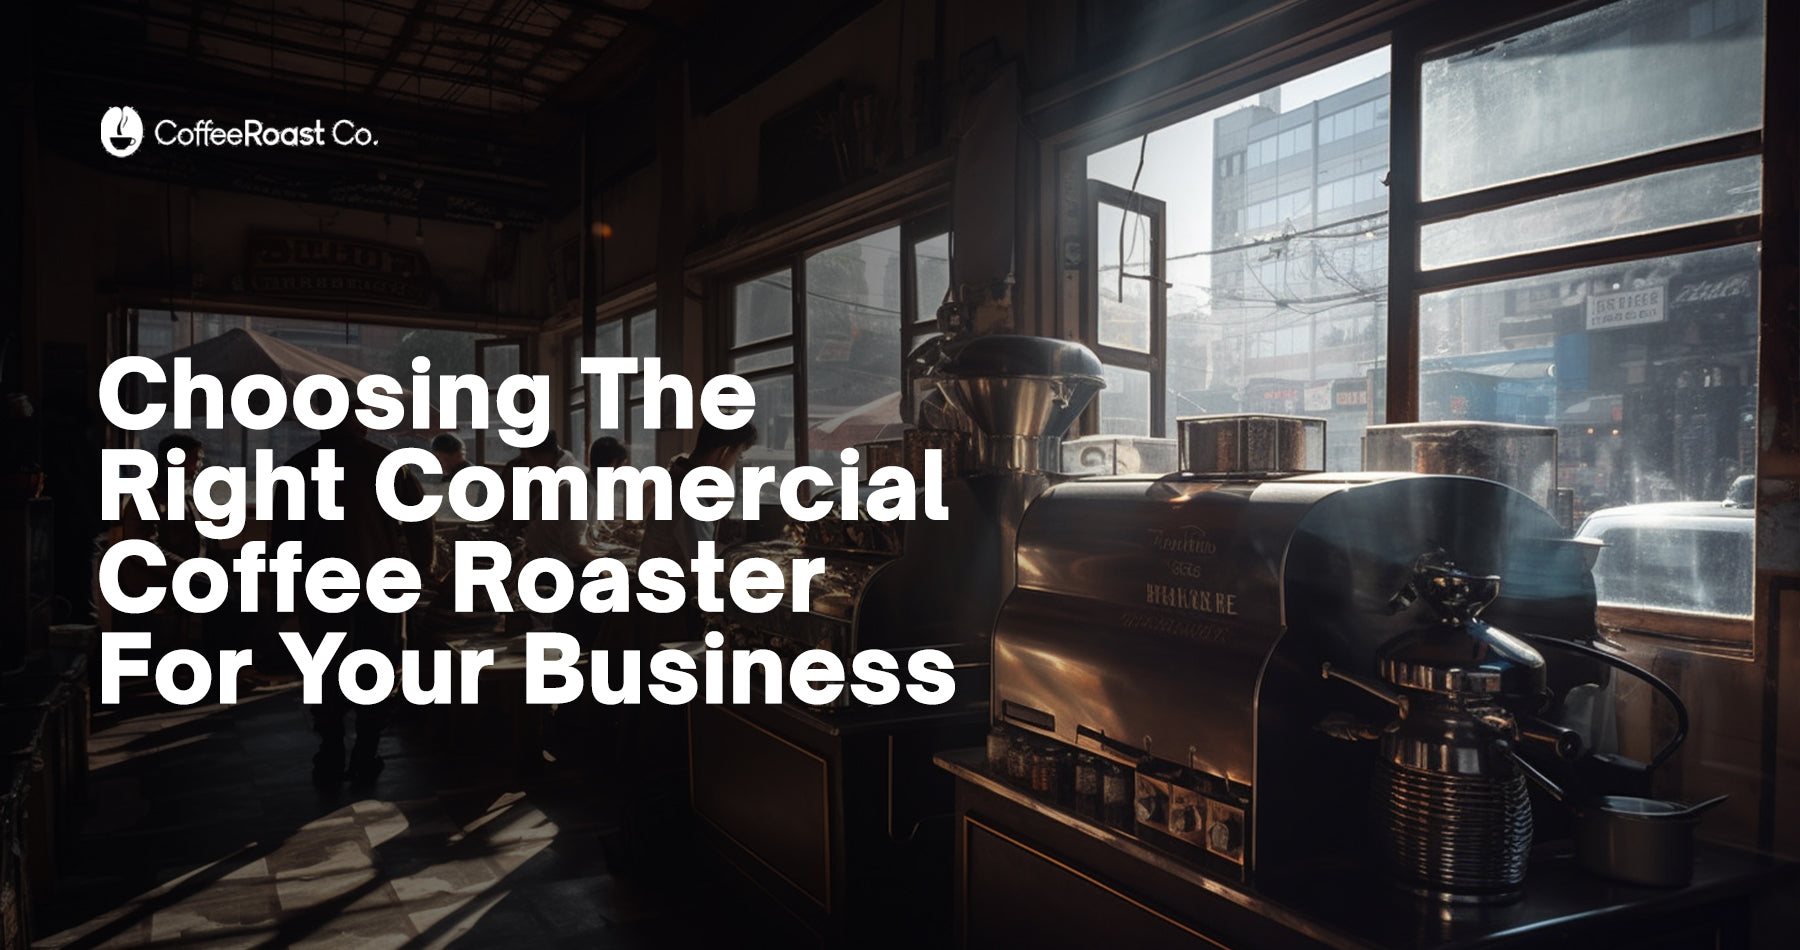 Choosing the Right Commercial Coffee Roaster for Your Business